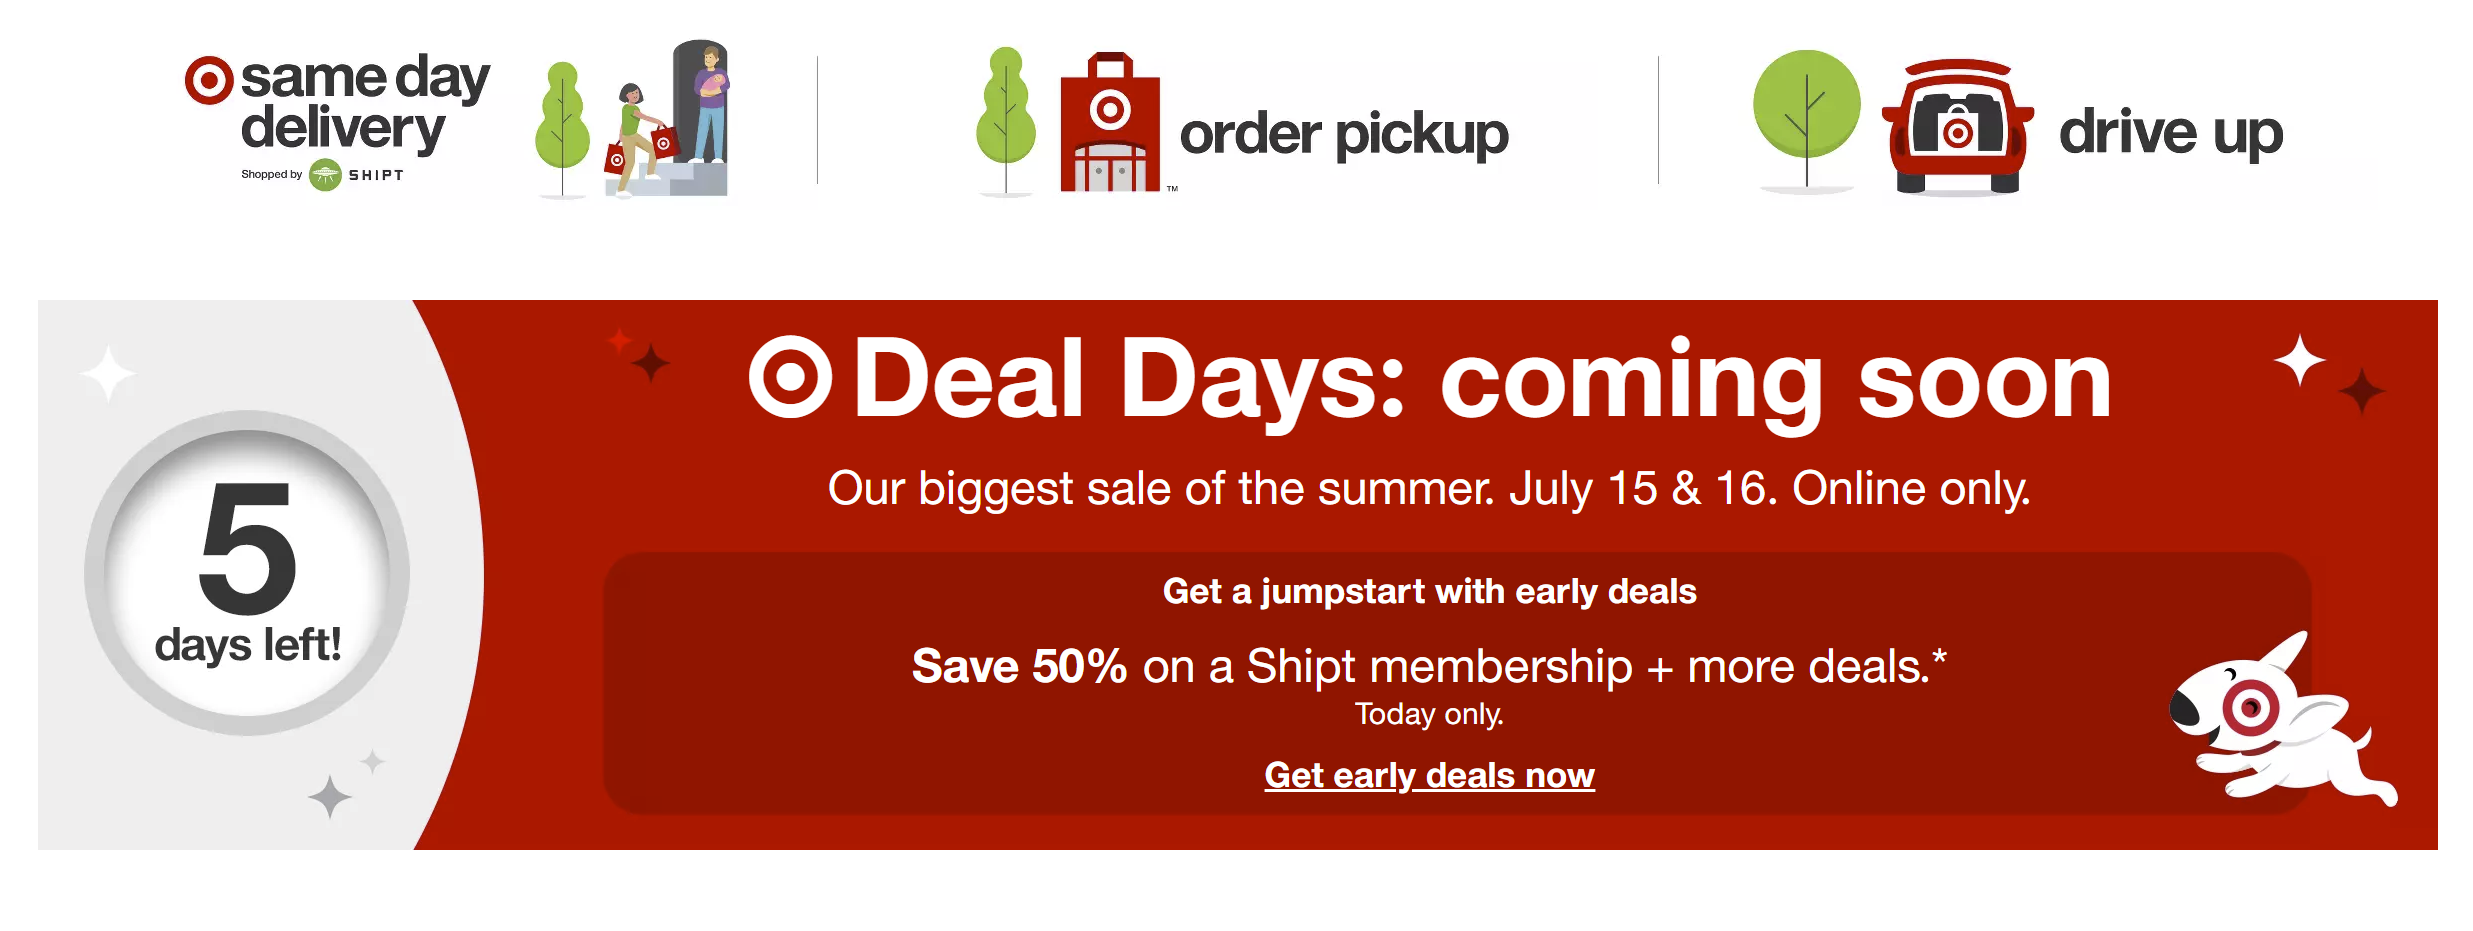 target deal day prime day competition promotion